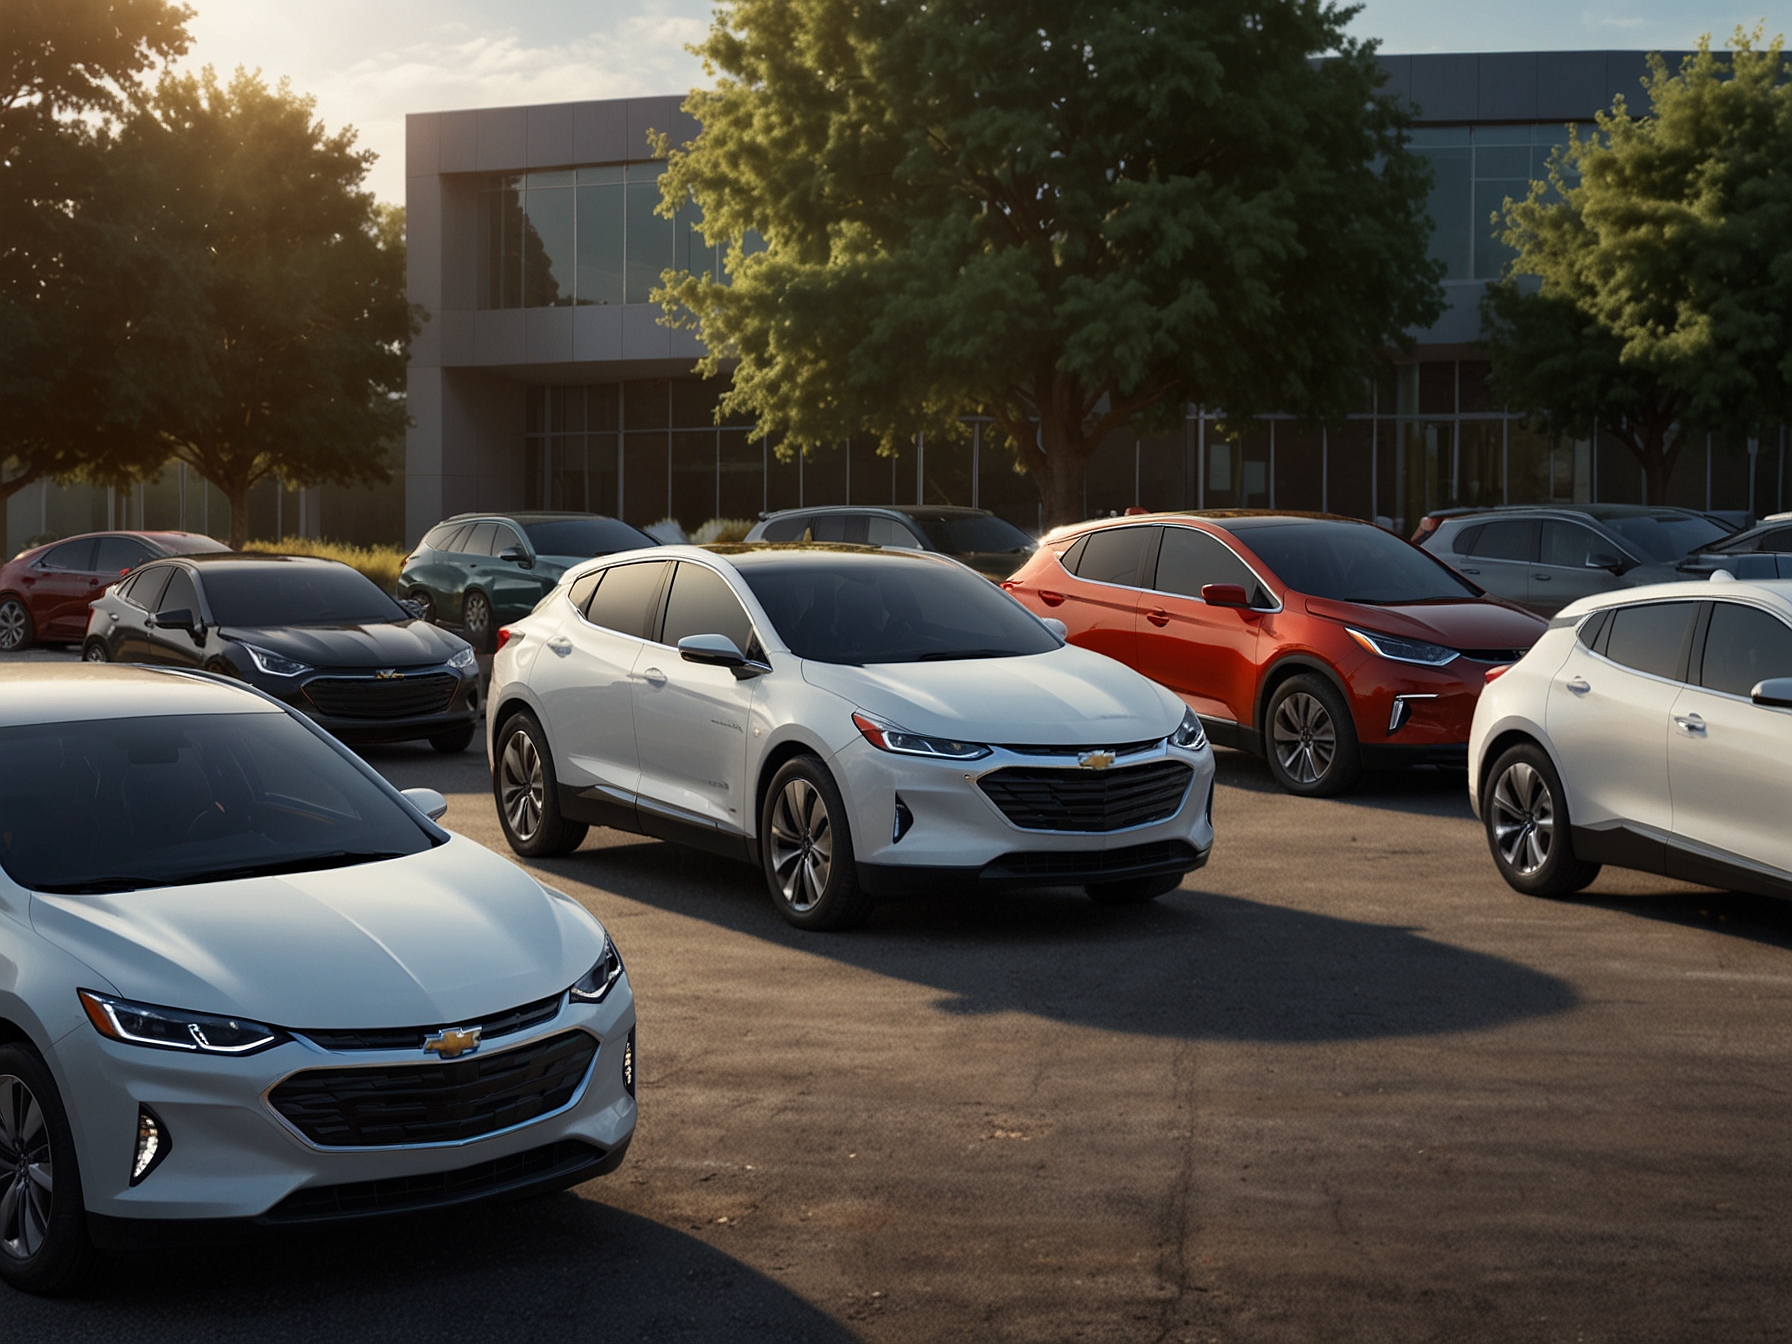 An illustration of General Motors' electric vehicles lineup, highlighting the innovative automotive technology that makes GM a prominent player in the industry with a low P/E ratio.